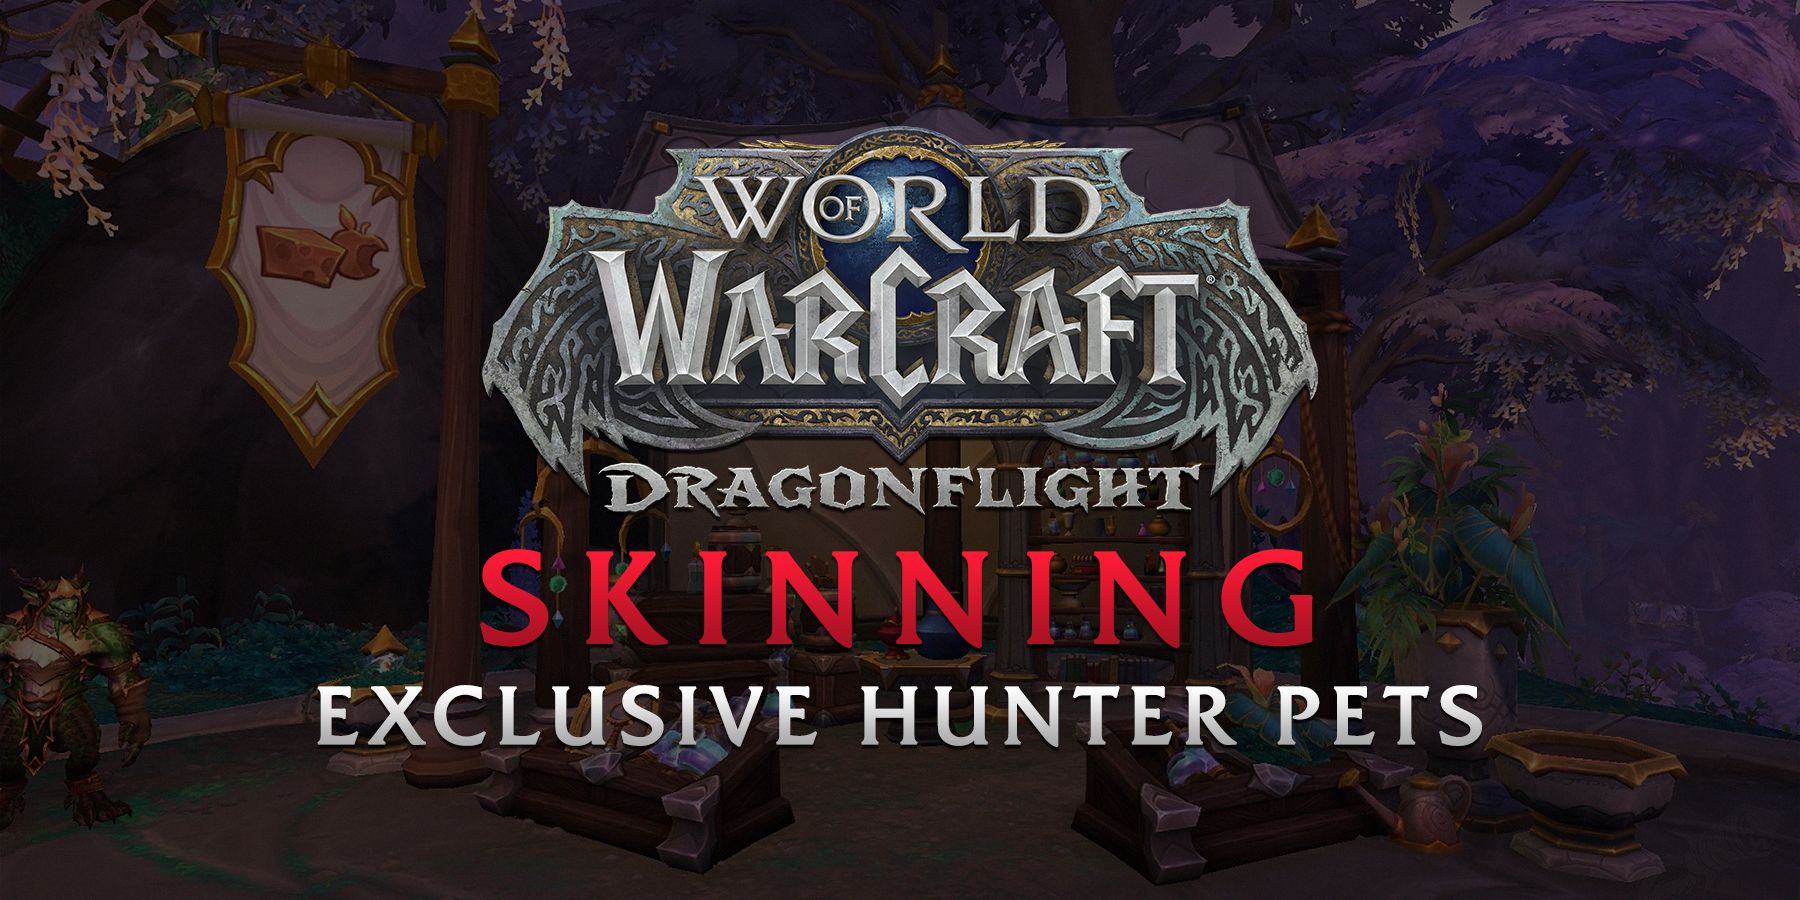 world of warcraft wow skinning exclusive hunter pets ice bears dragonflight